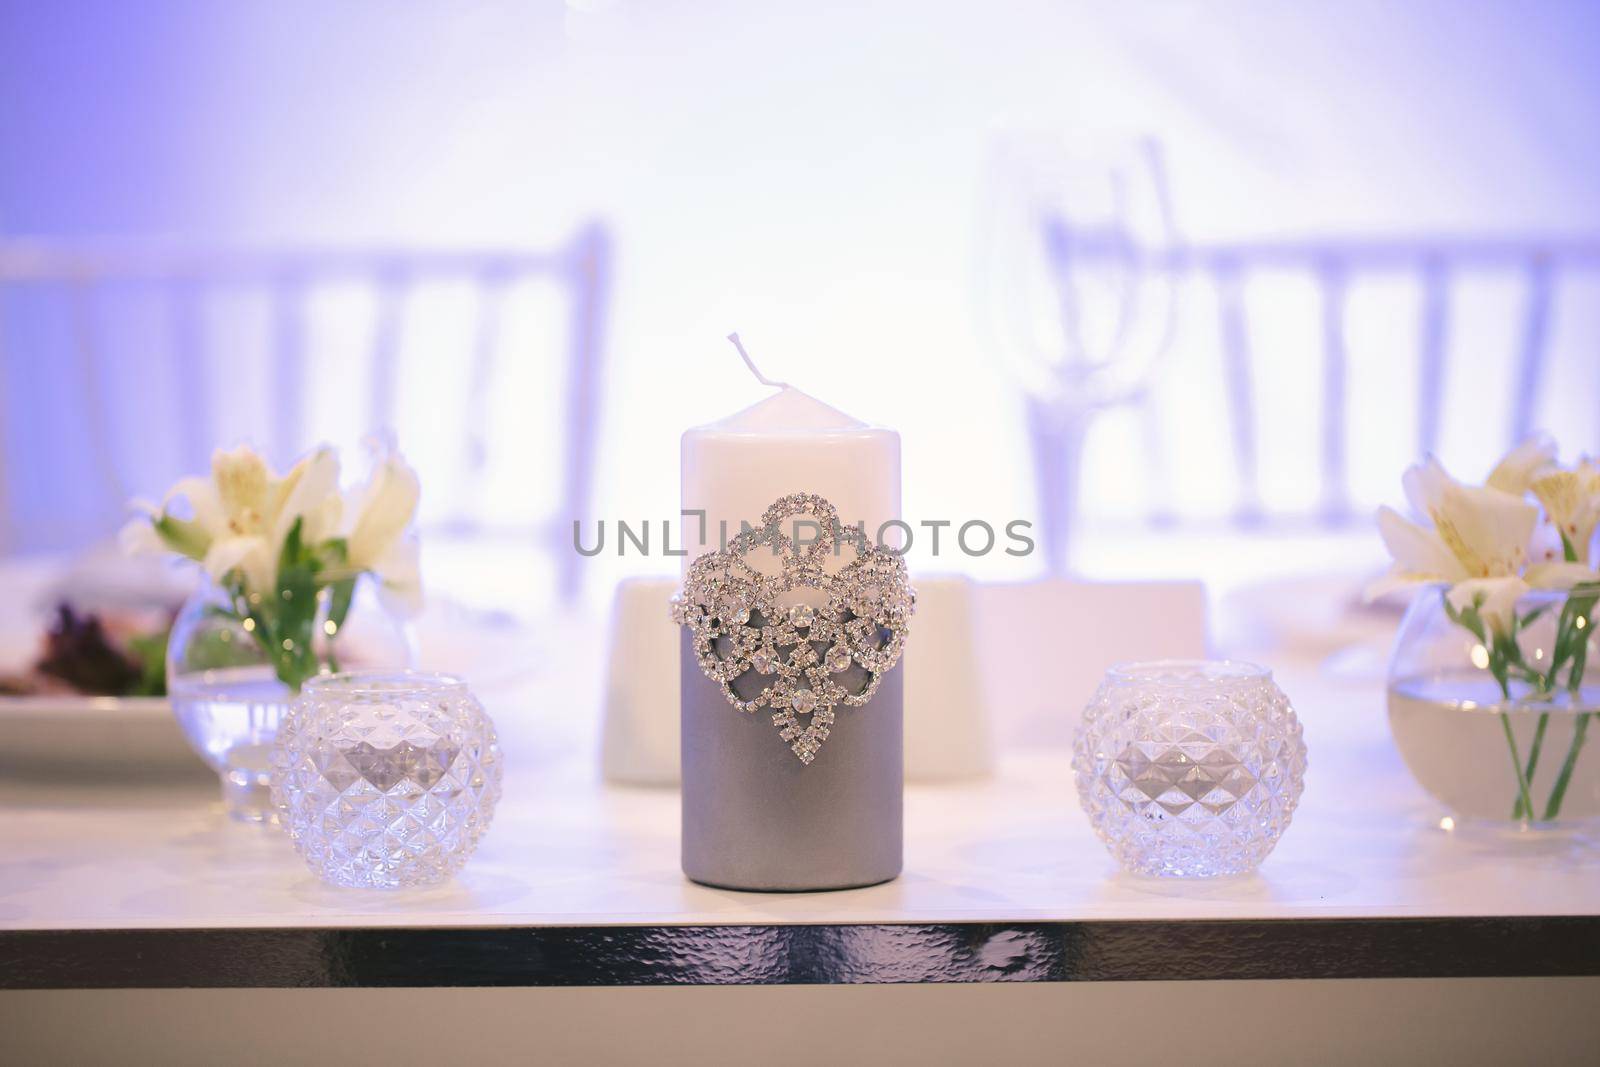 Wedding decor in silver style with crystals, lace and flowers. Wedding candles for the family hearth. by StudioPeace